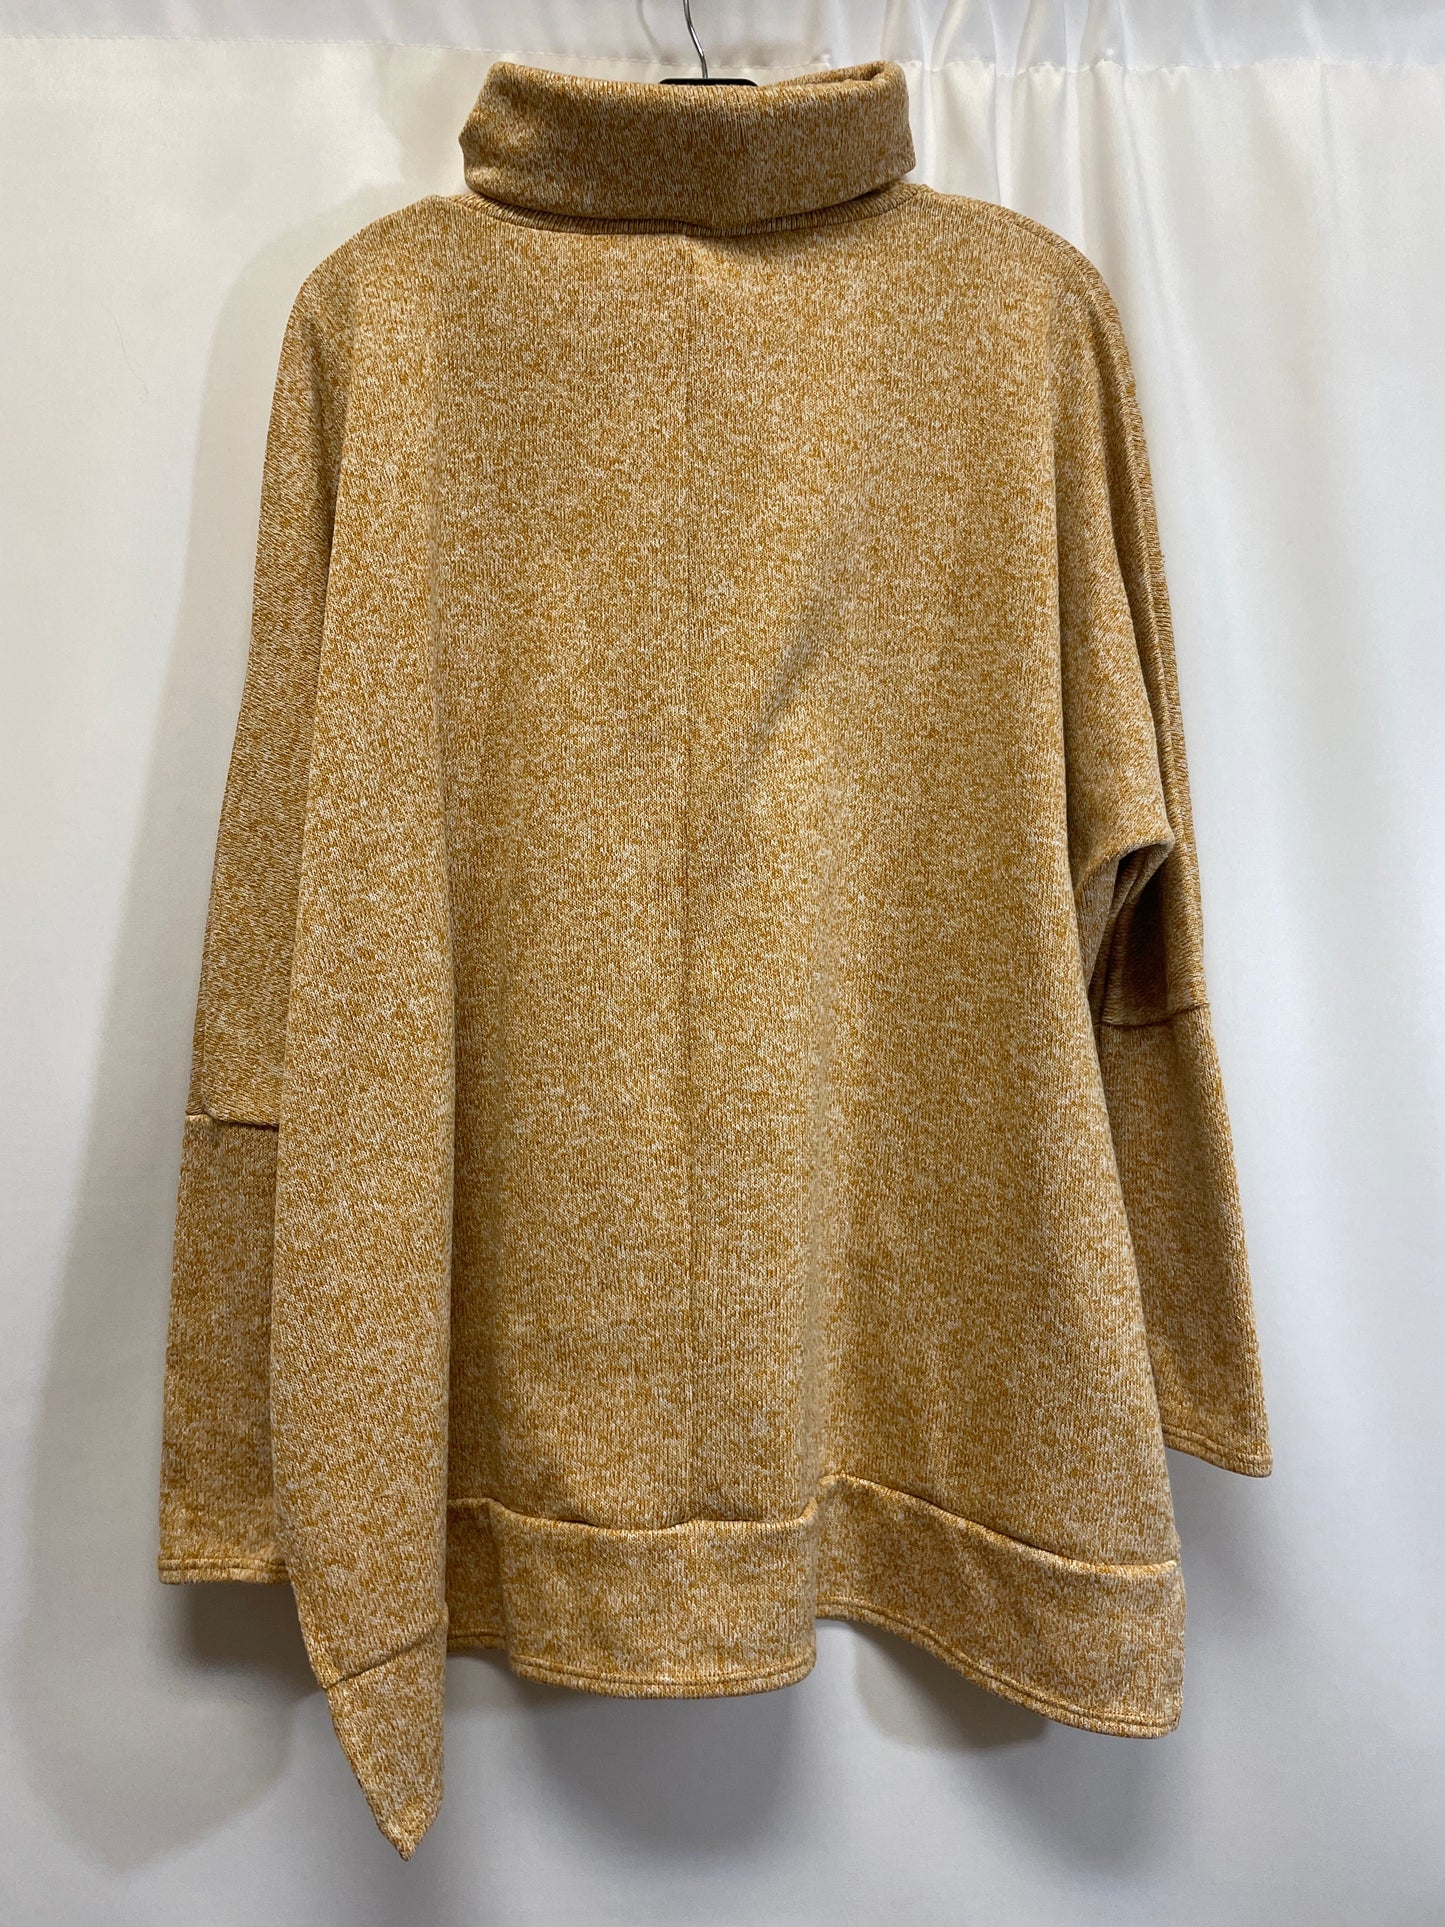 Yellow Top Long Sleeve Zenana Outfitters, Size S